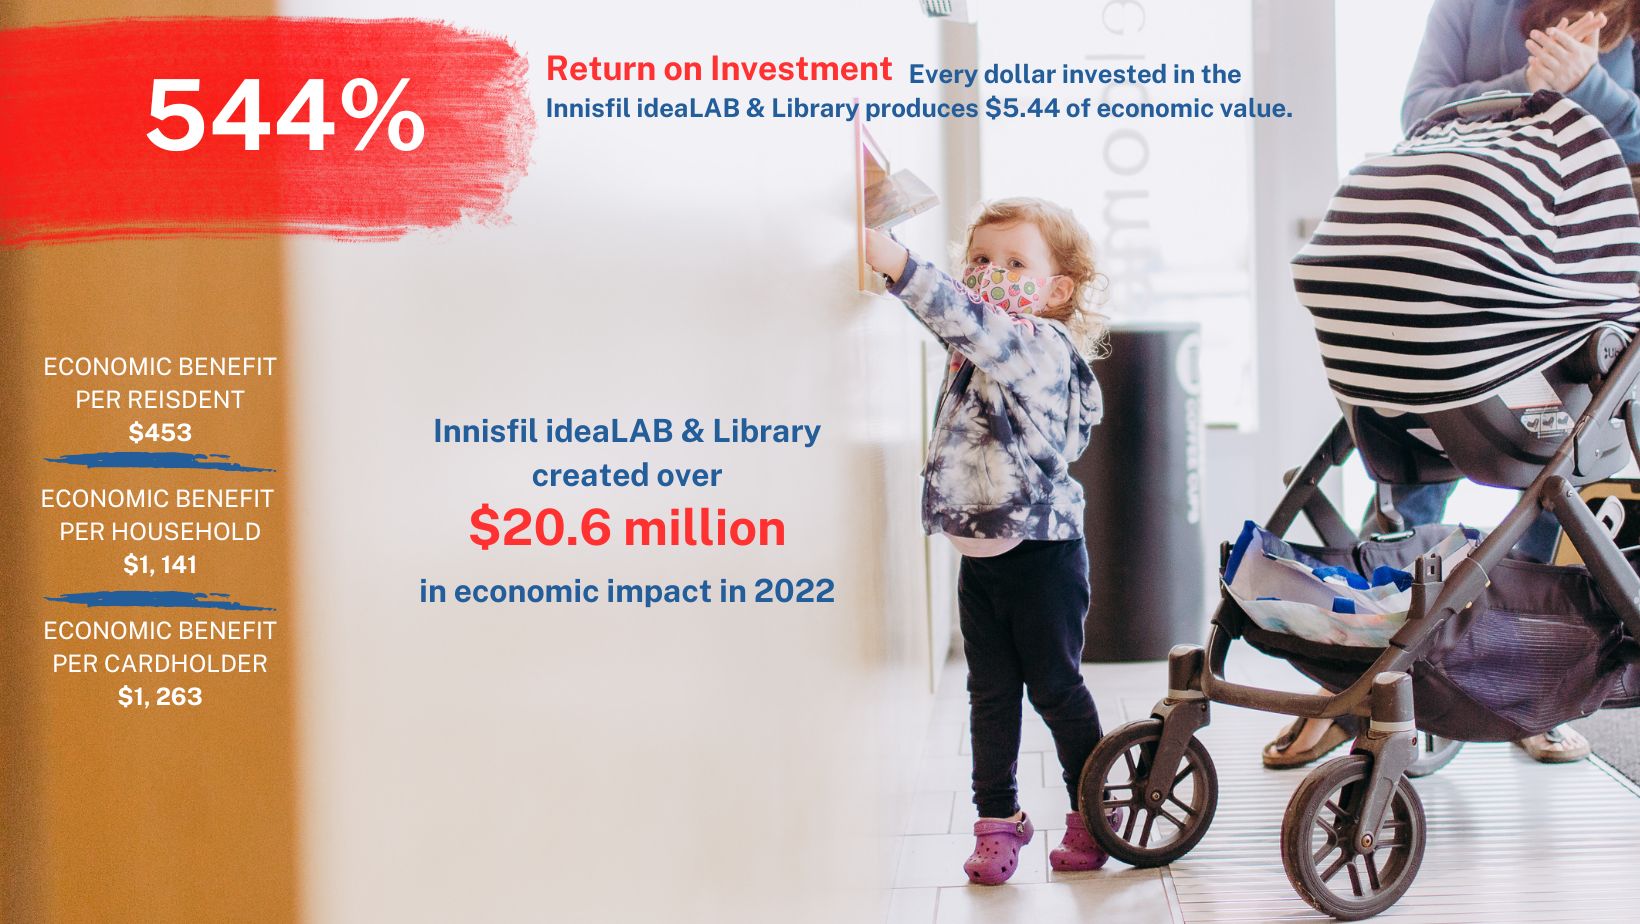 a girl looks at the camera while placing books in the library book drop. a text overlay sas 544% Return on Investment. Every dollar Invested in teh Innisfil ideaLAB & LIbrary produces $5.44 of economic value.